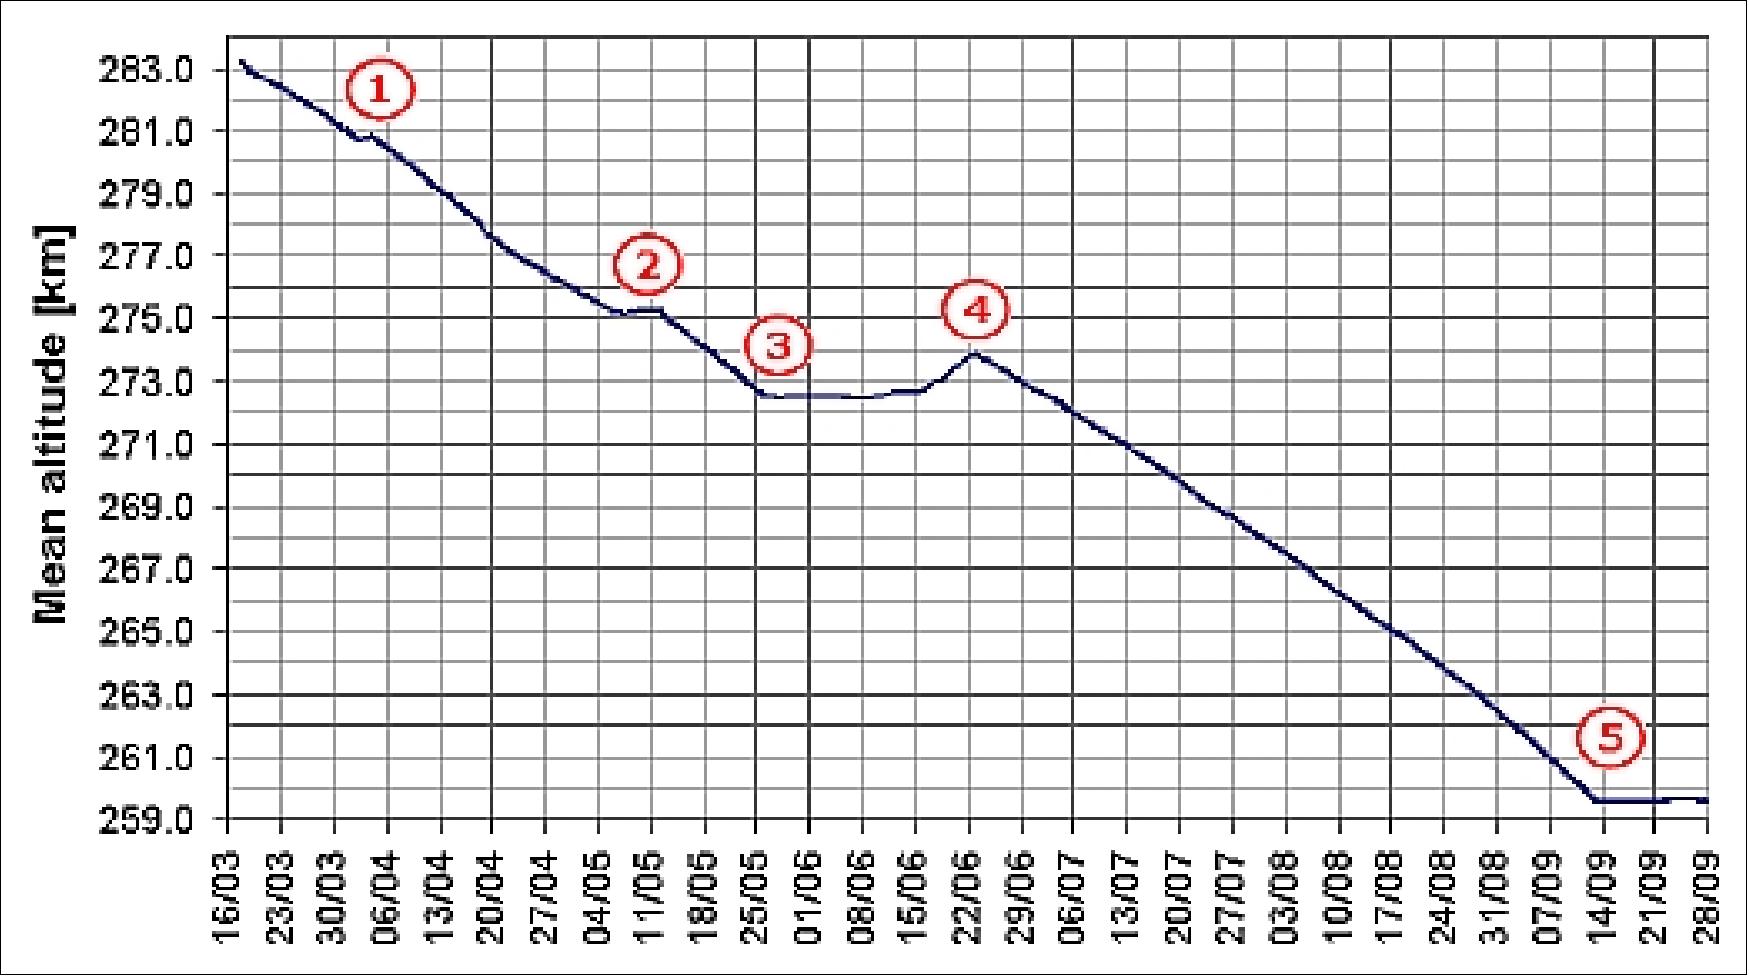 Figure 72: Altitude of GOCE from launch (March 17 2009) up to stop of the orbit decay in September 2009 (image credit: ESA)